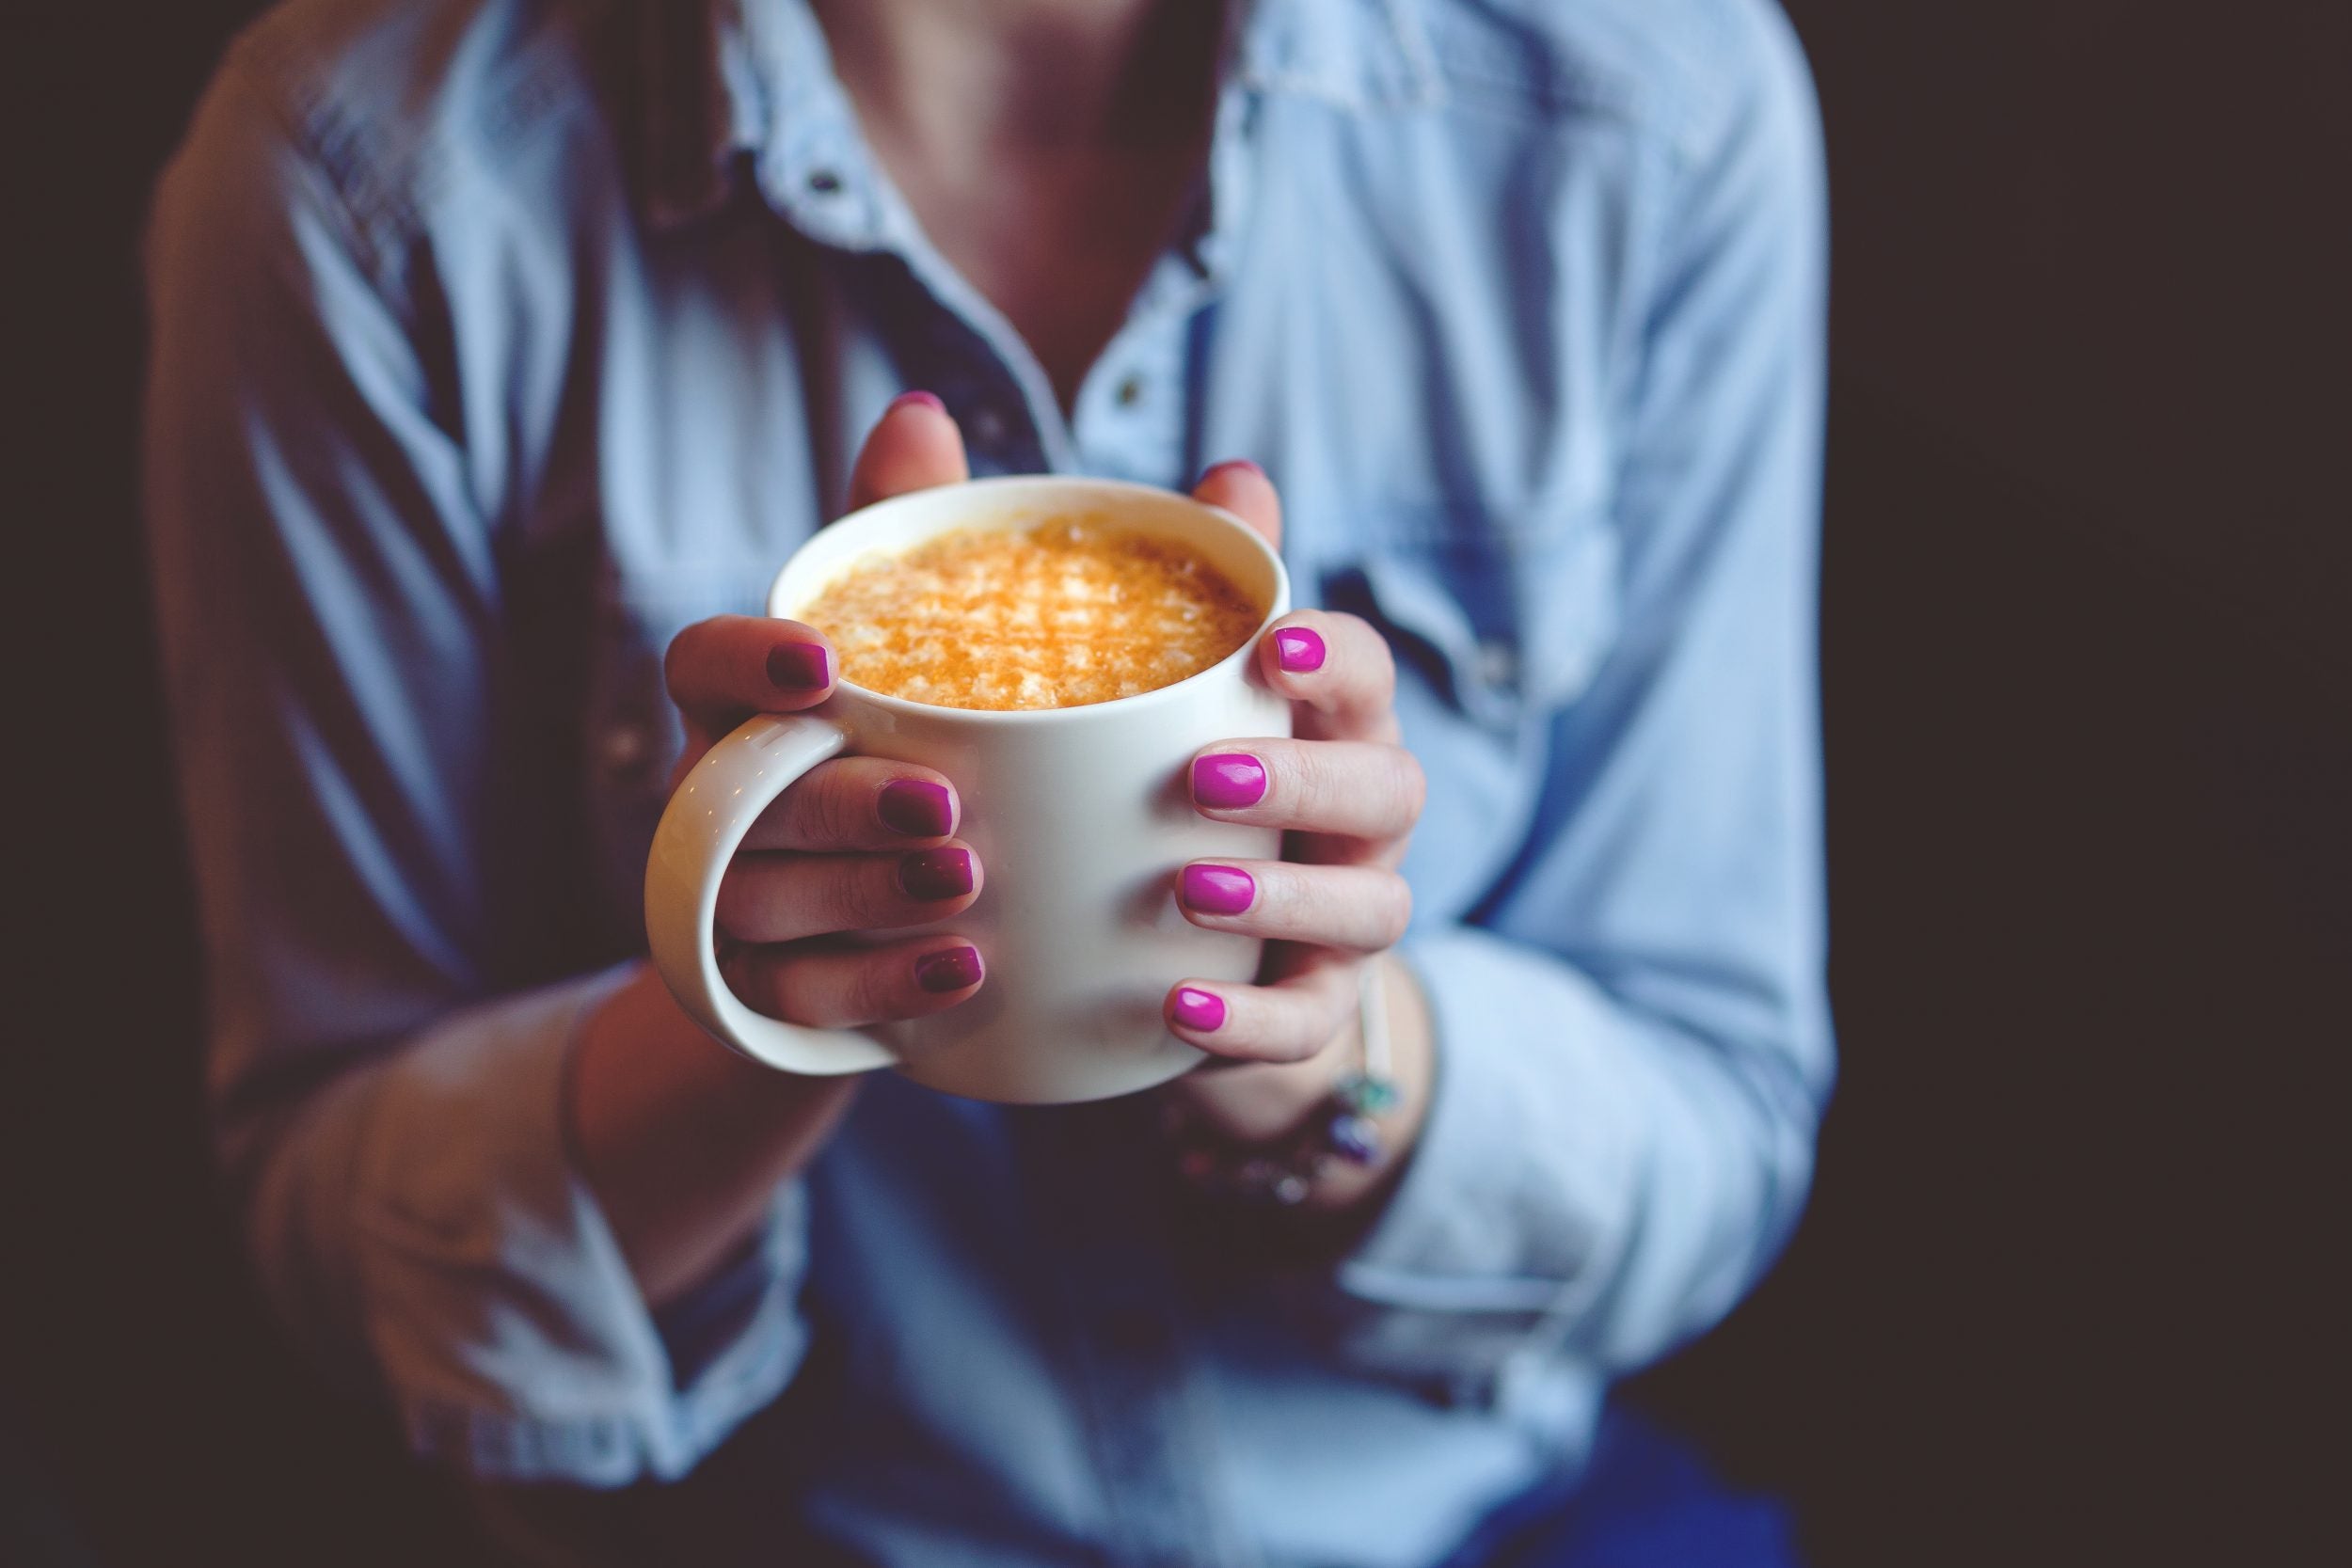 Woman sipping coffee from mug.